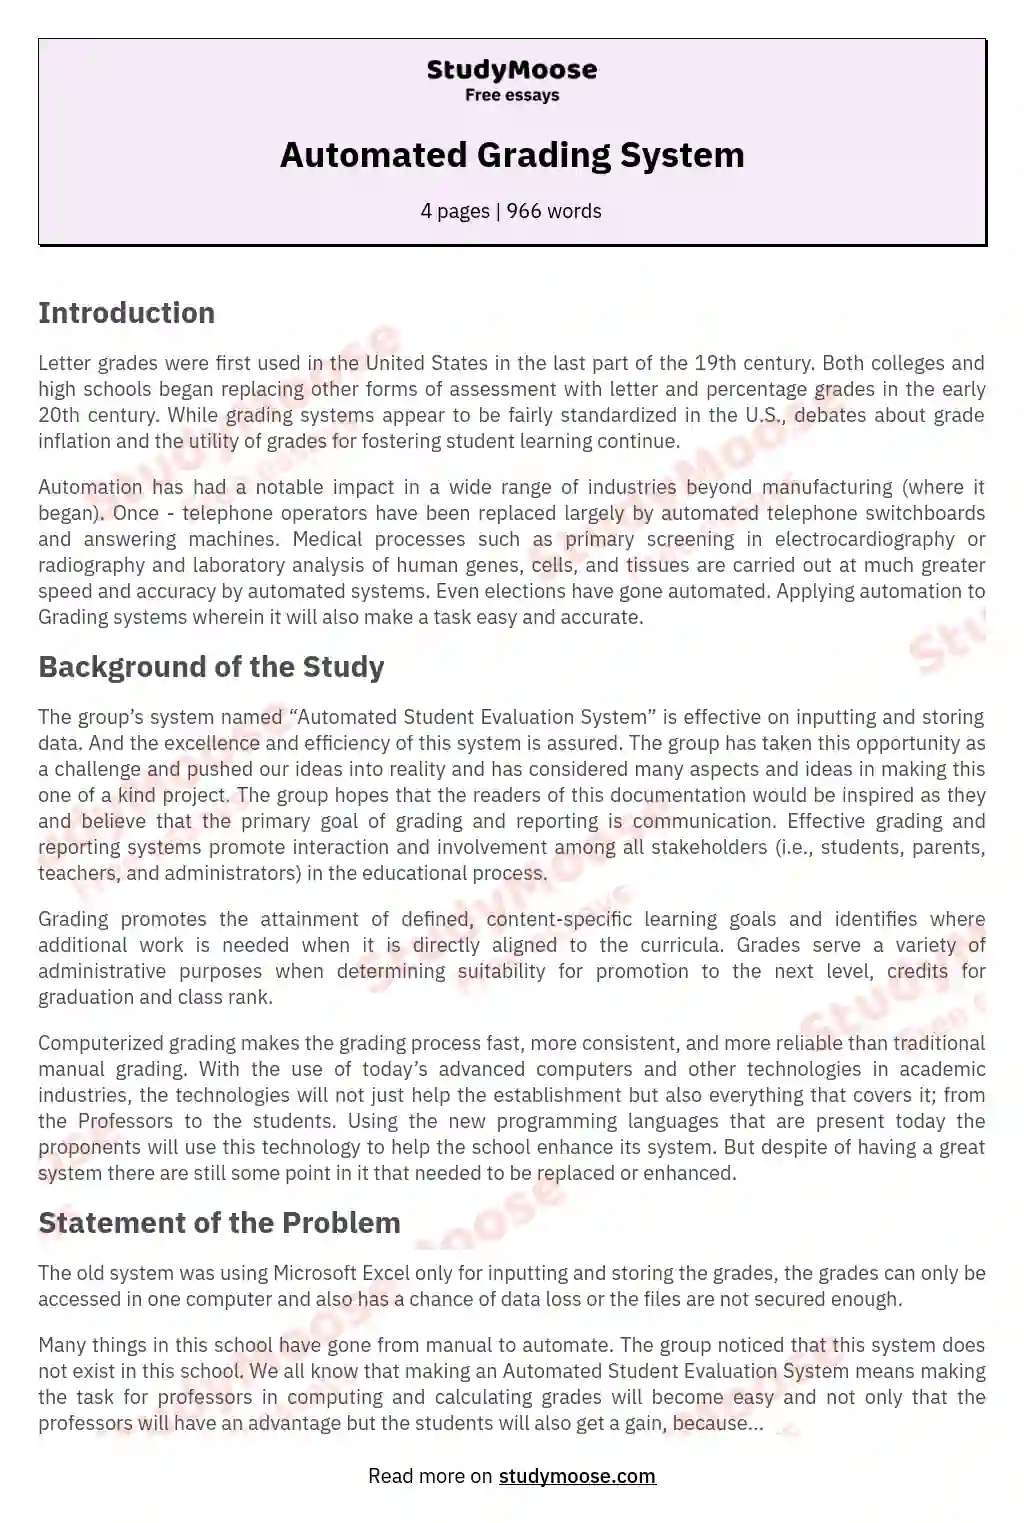 Automated Grading System essay